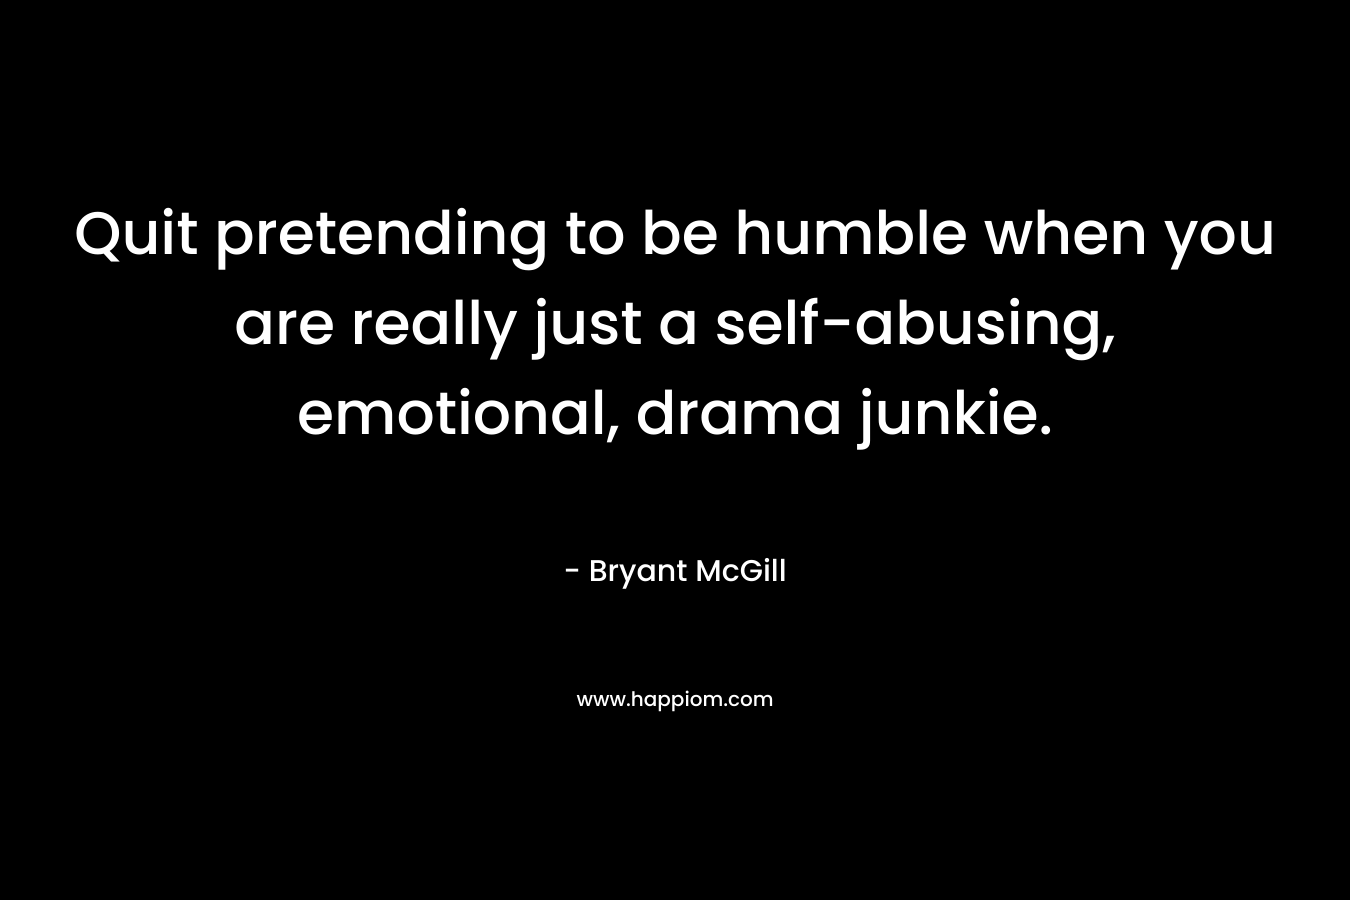 Quit pretending to be humble when you are really just a self-abusing, emotional, drama junkie. – Bryant McGill